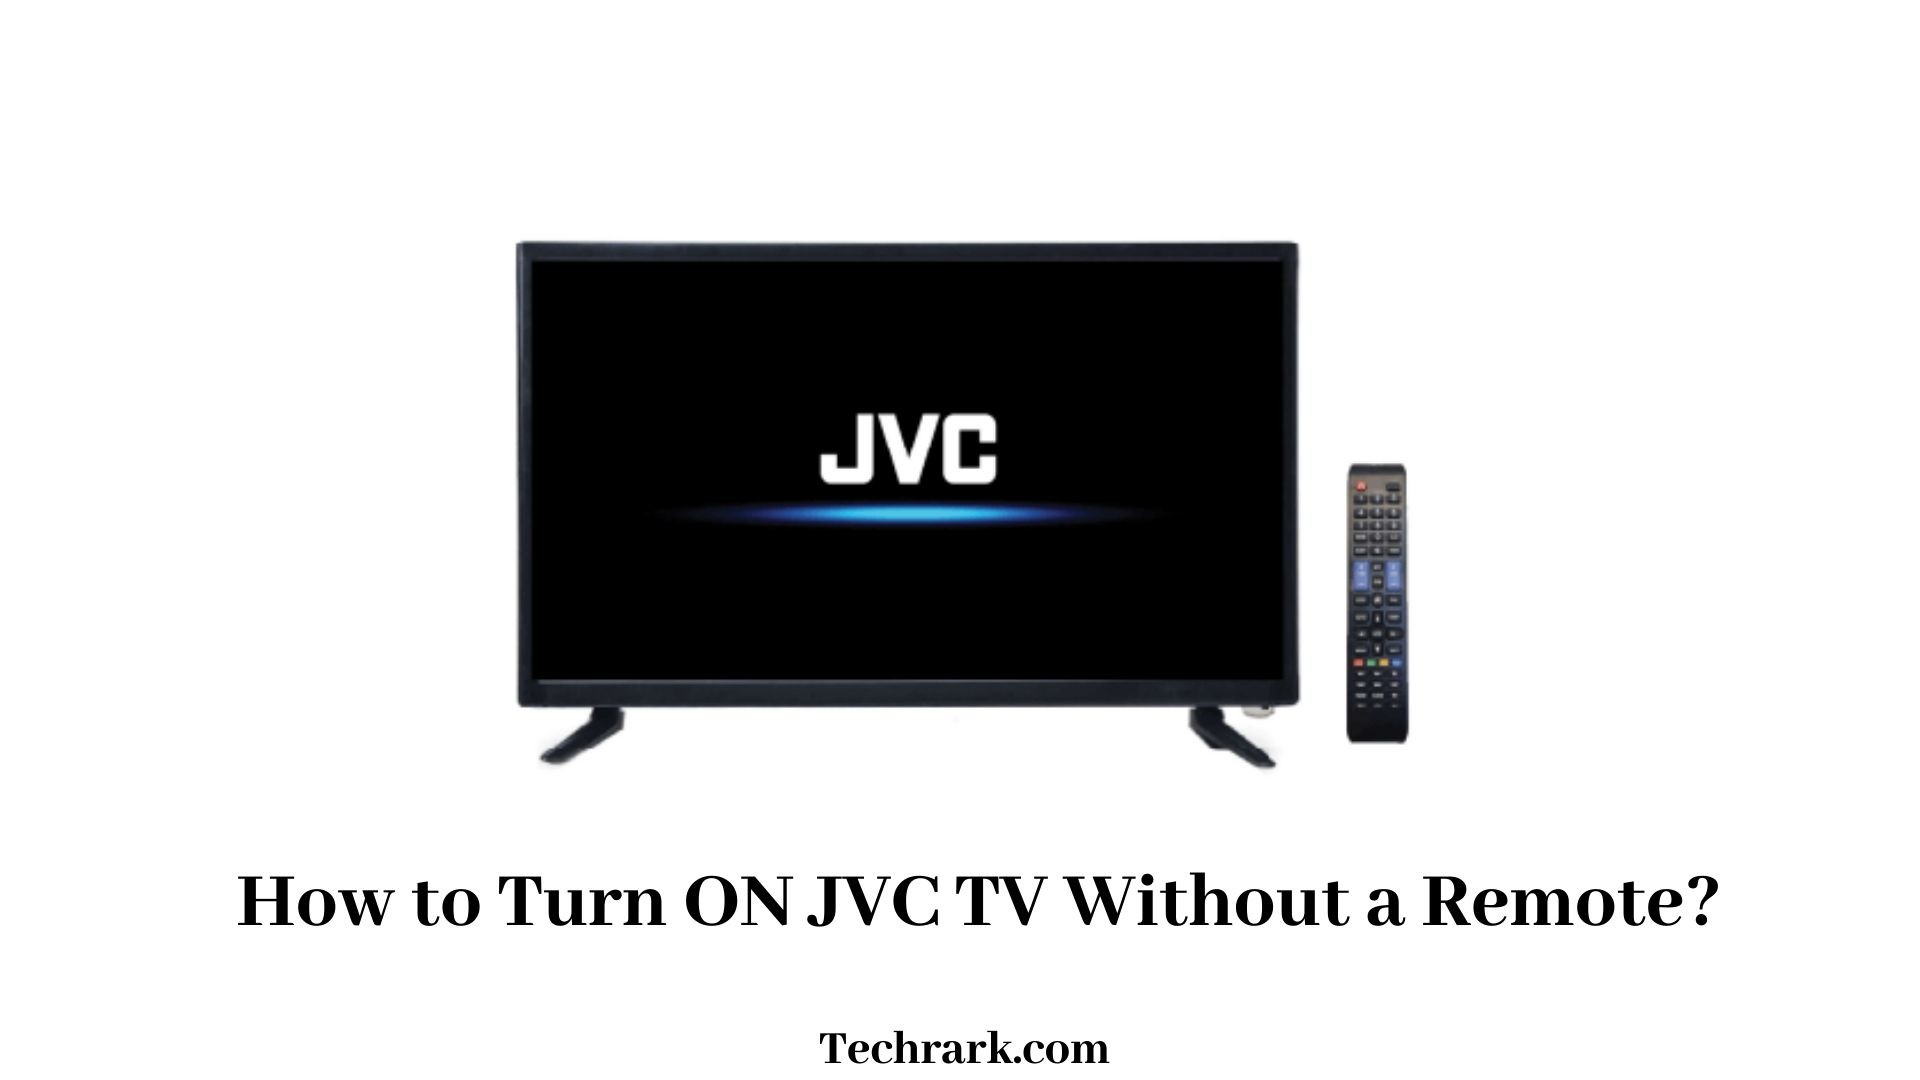 How to Turn ON JVC TV Without Remote